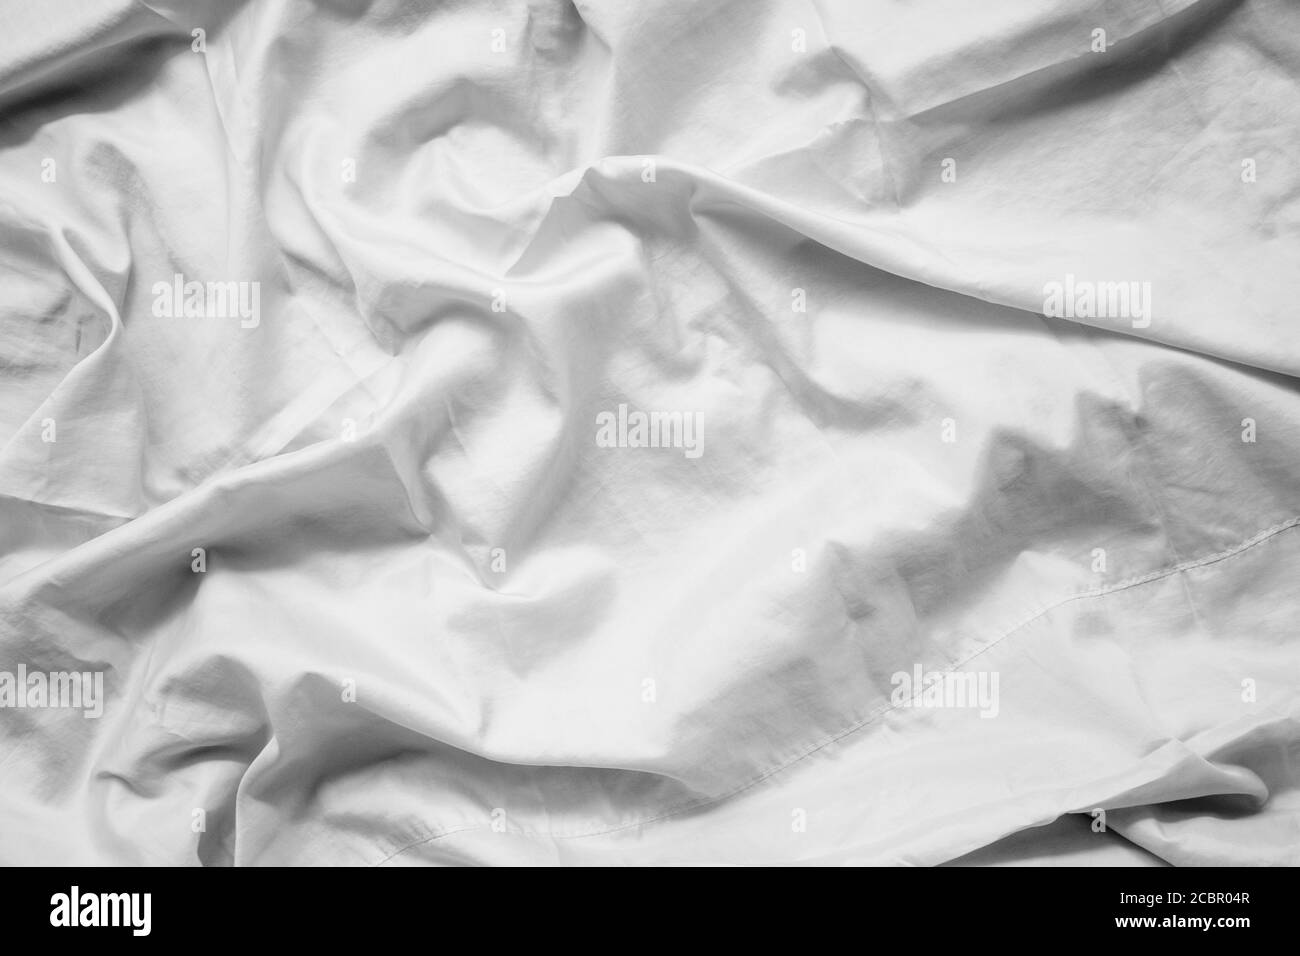 White fabric abstract background concept. white wrinkled silk cloth wave texture satin material Stock Photo